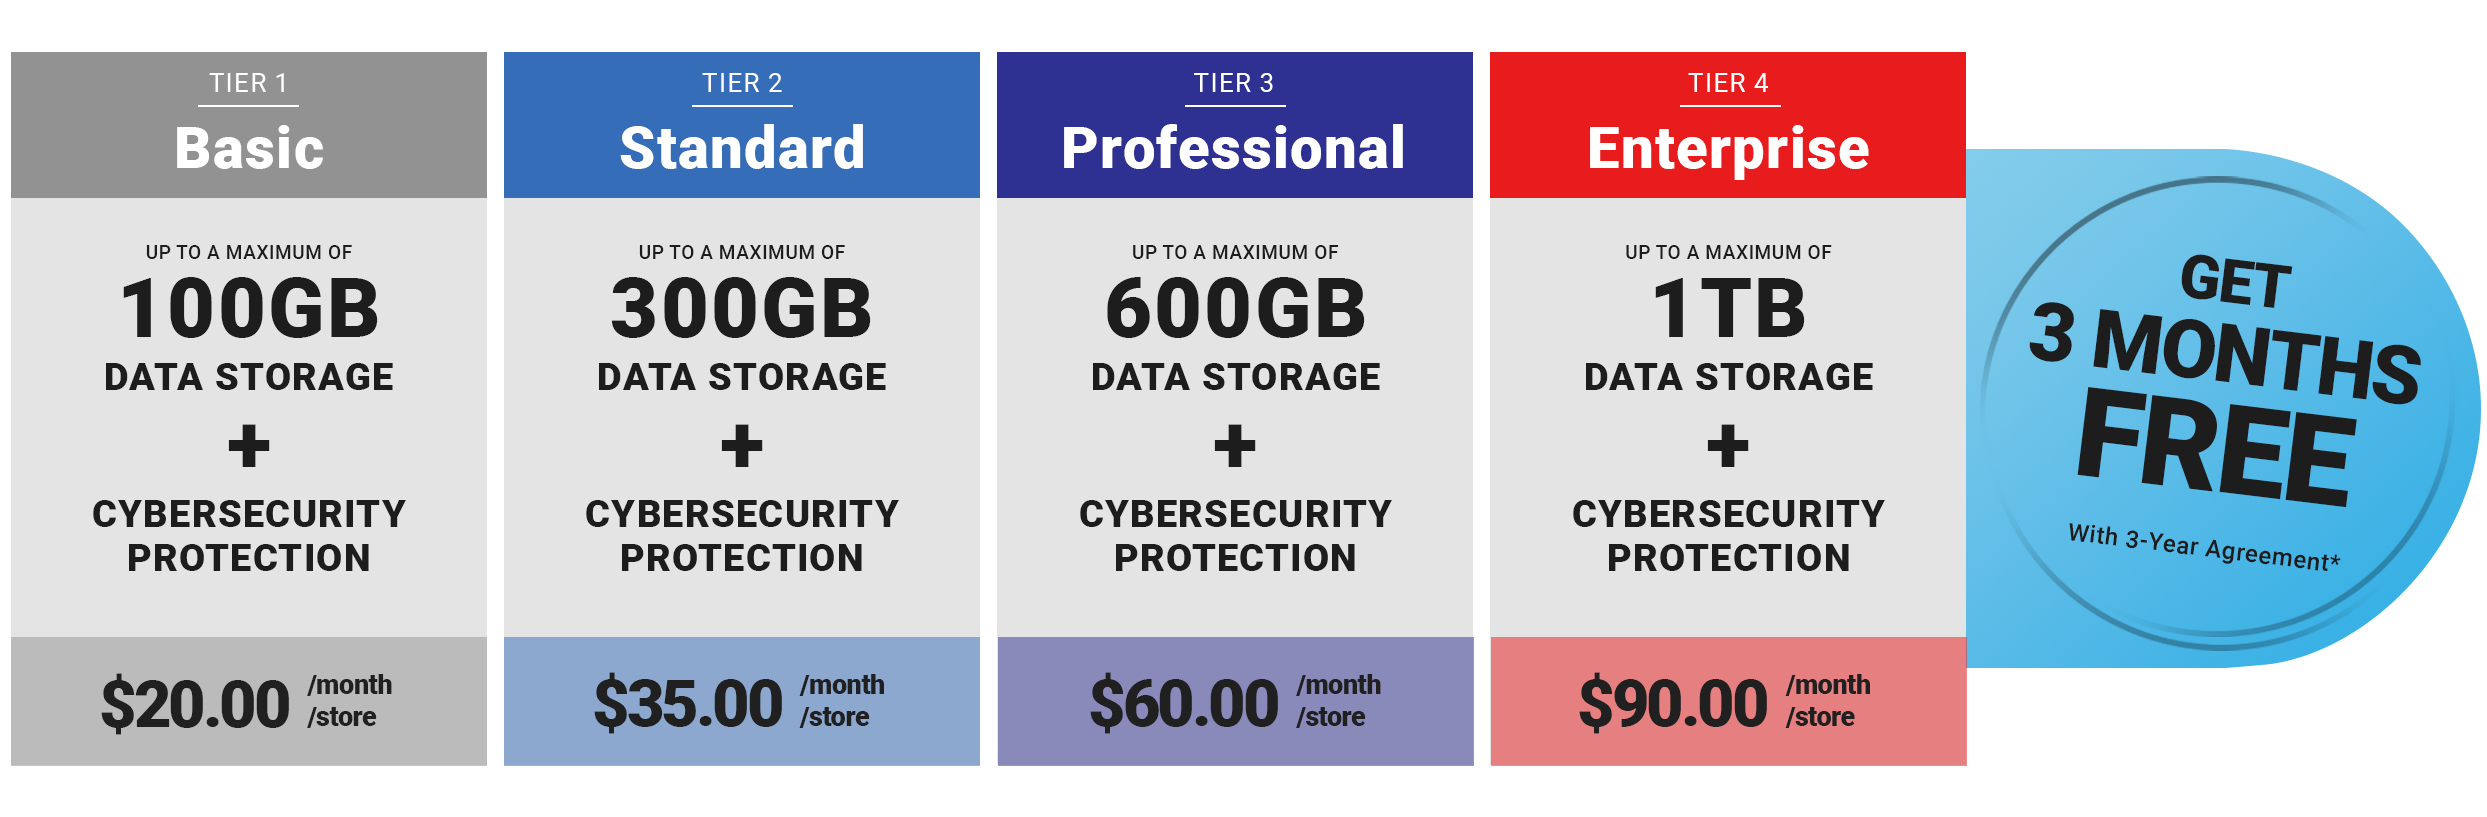 Pricing is separated into four tiers - Basic at 100GB for $20.00 per month - 
                    Standard at 300GB for $35.00 per month - Professional at 600GB for $60.00 per month - Enterprise at 
                    1TB for $90.00 per month. All plans include Cybersecurity Protection